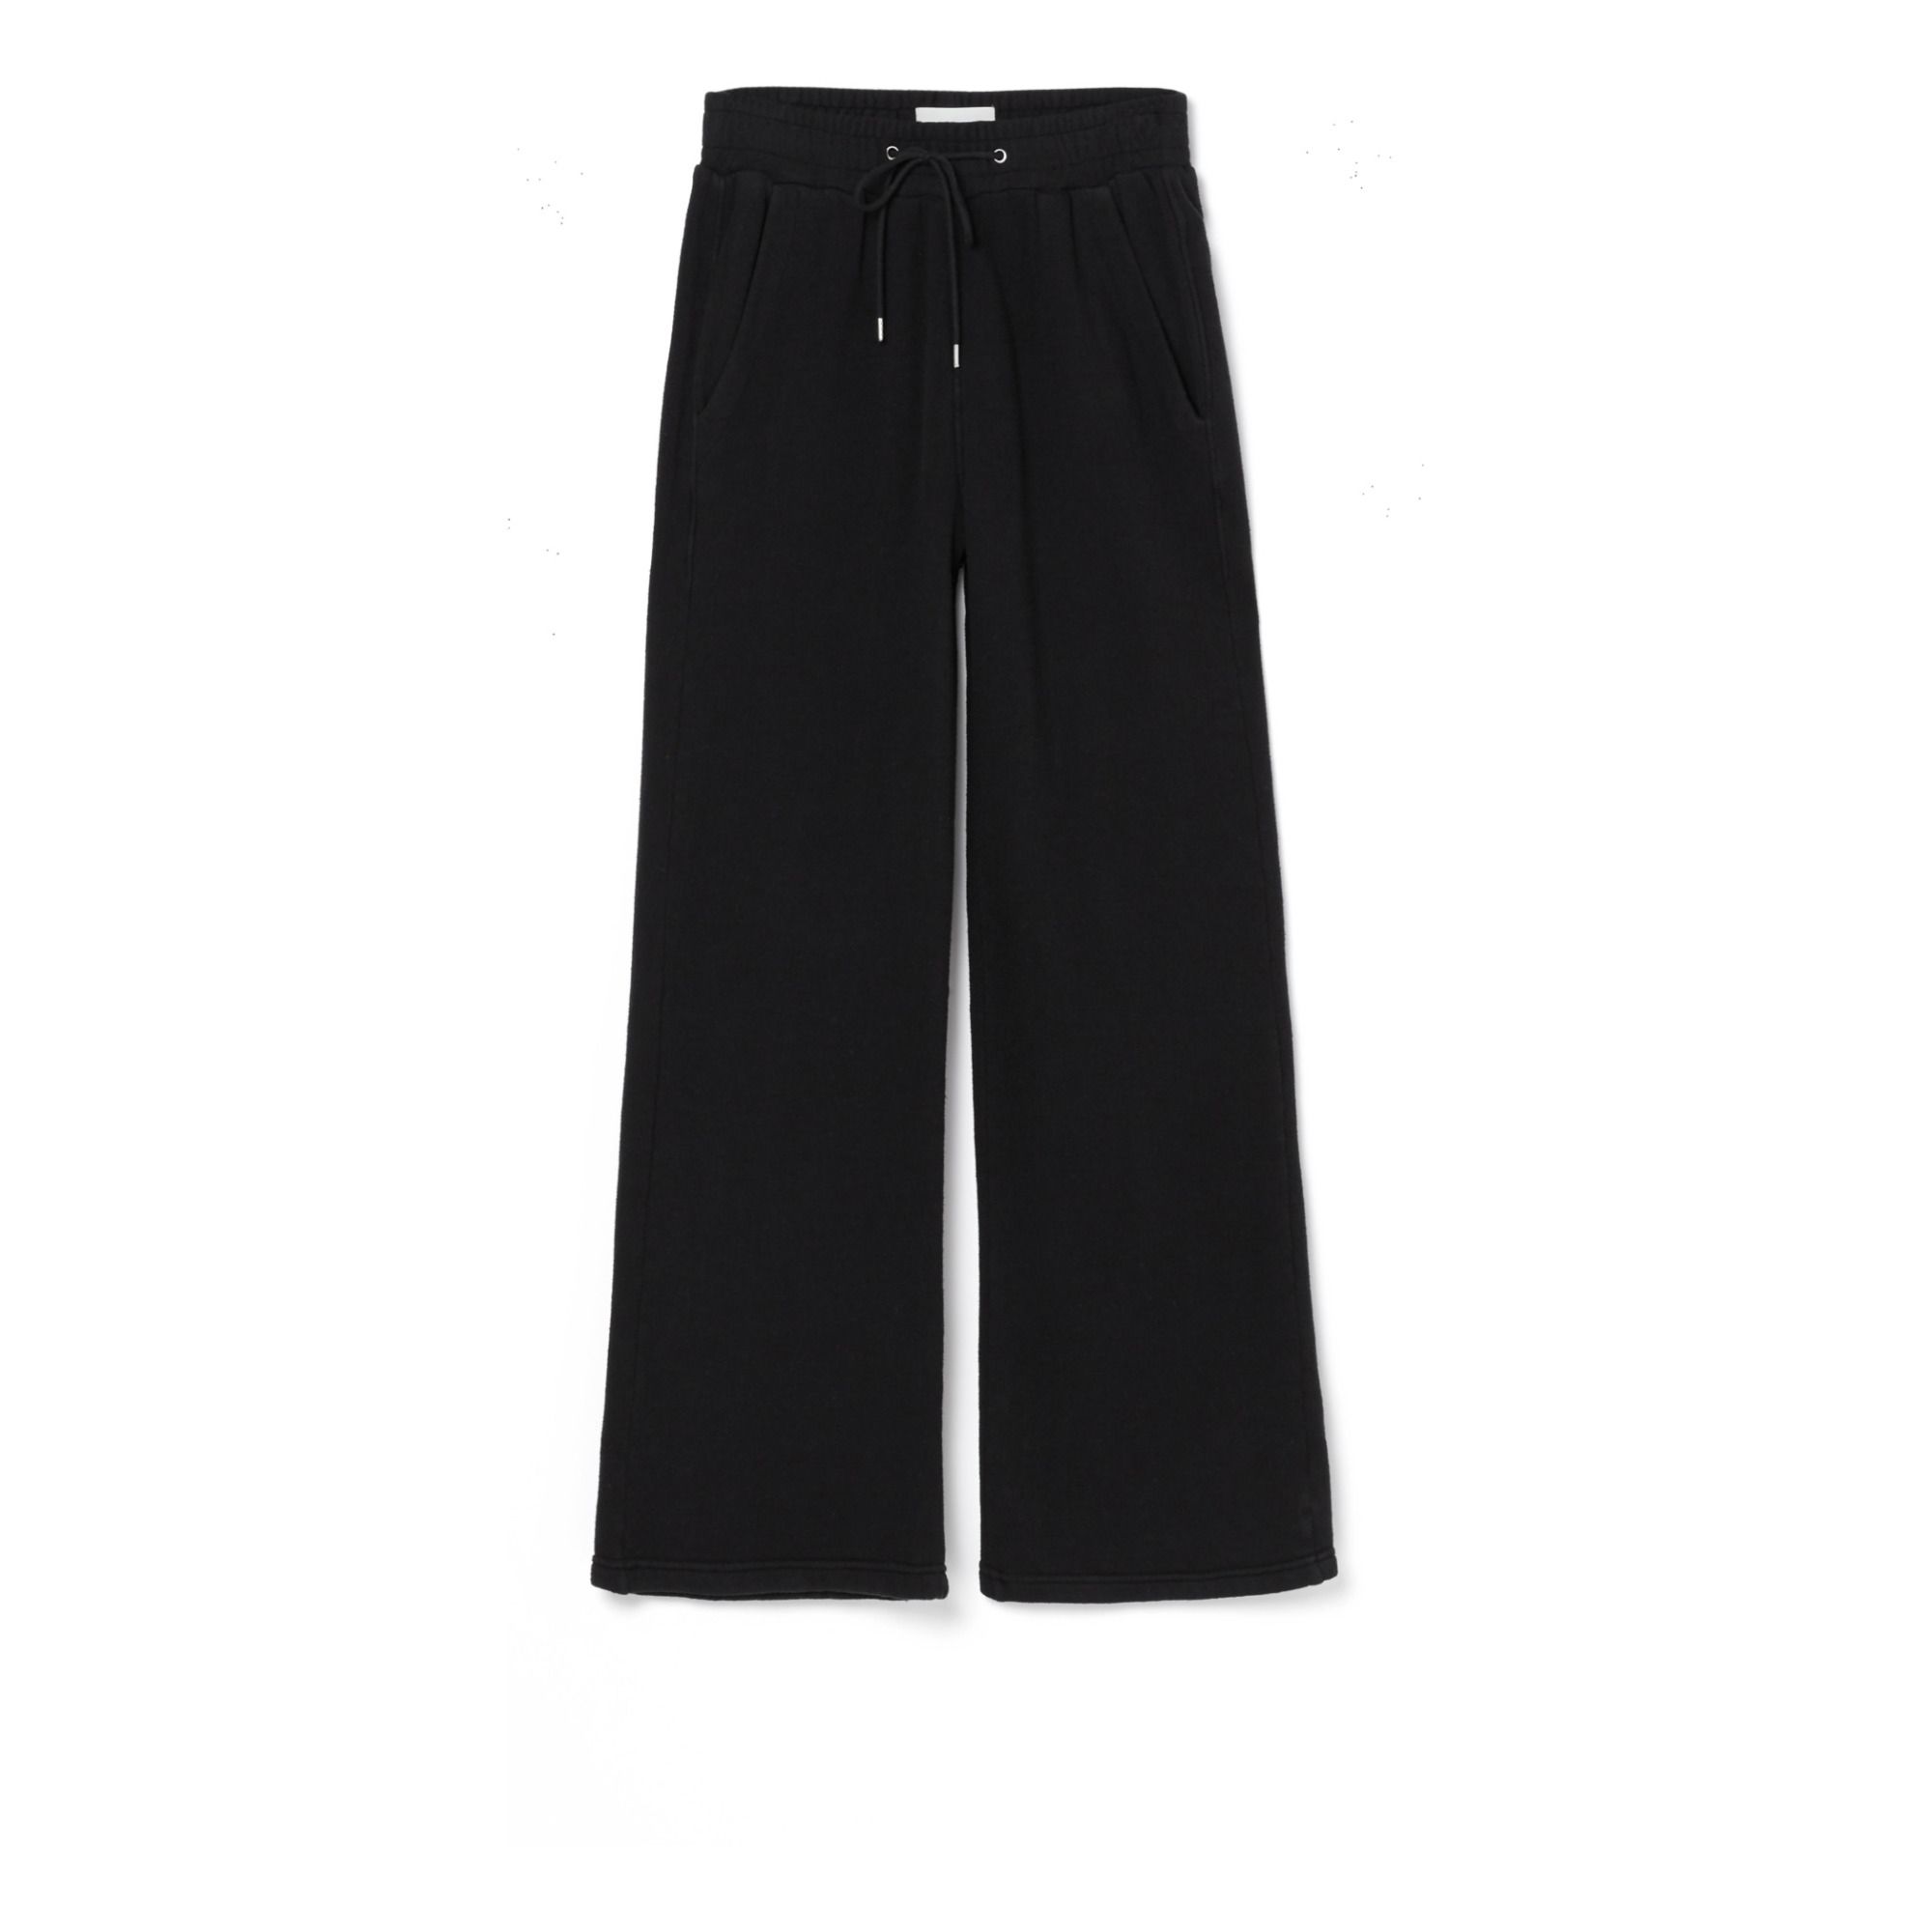 Citizens of Humanity - Jogger Large Nia - Femme - Noir